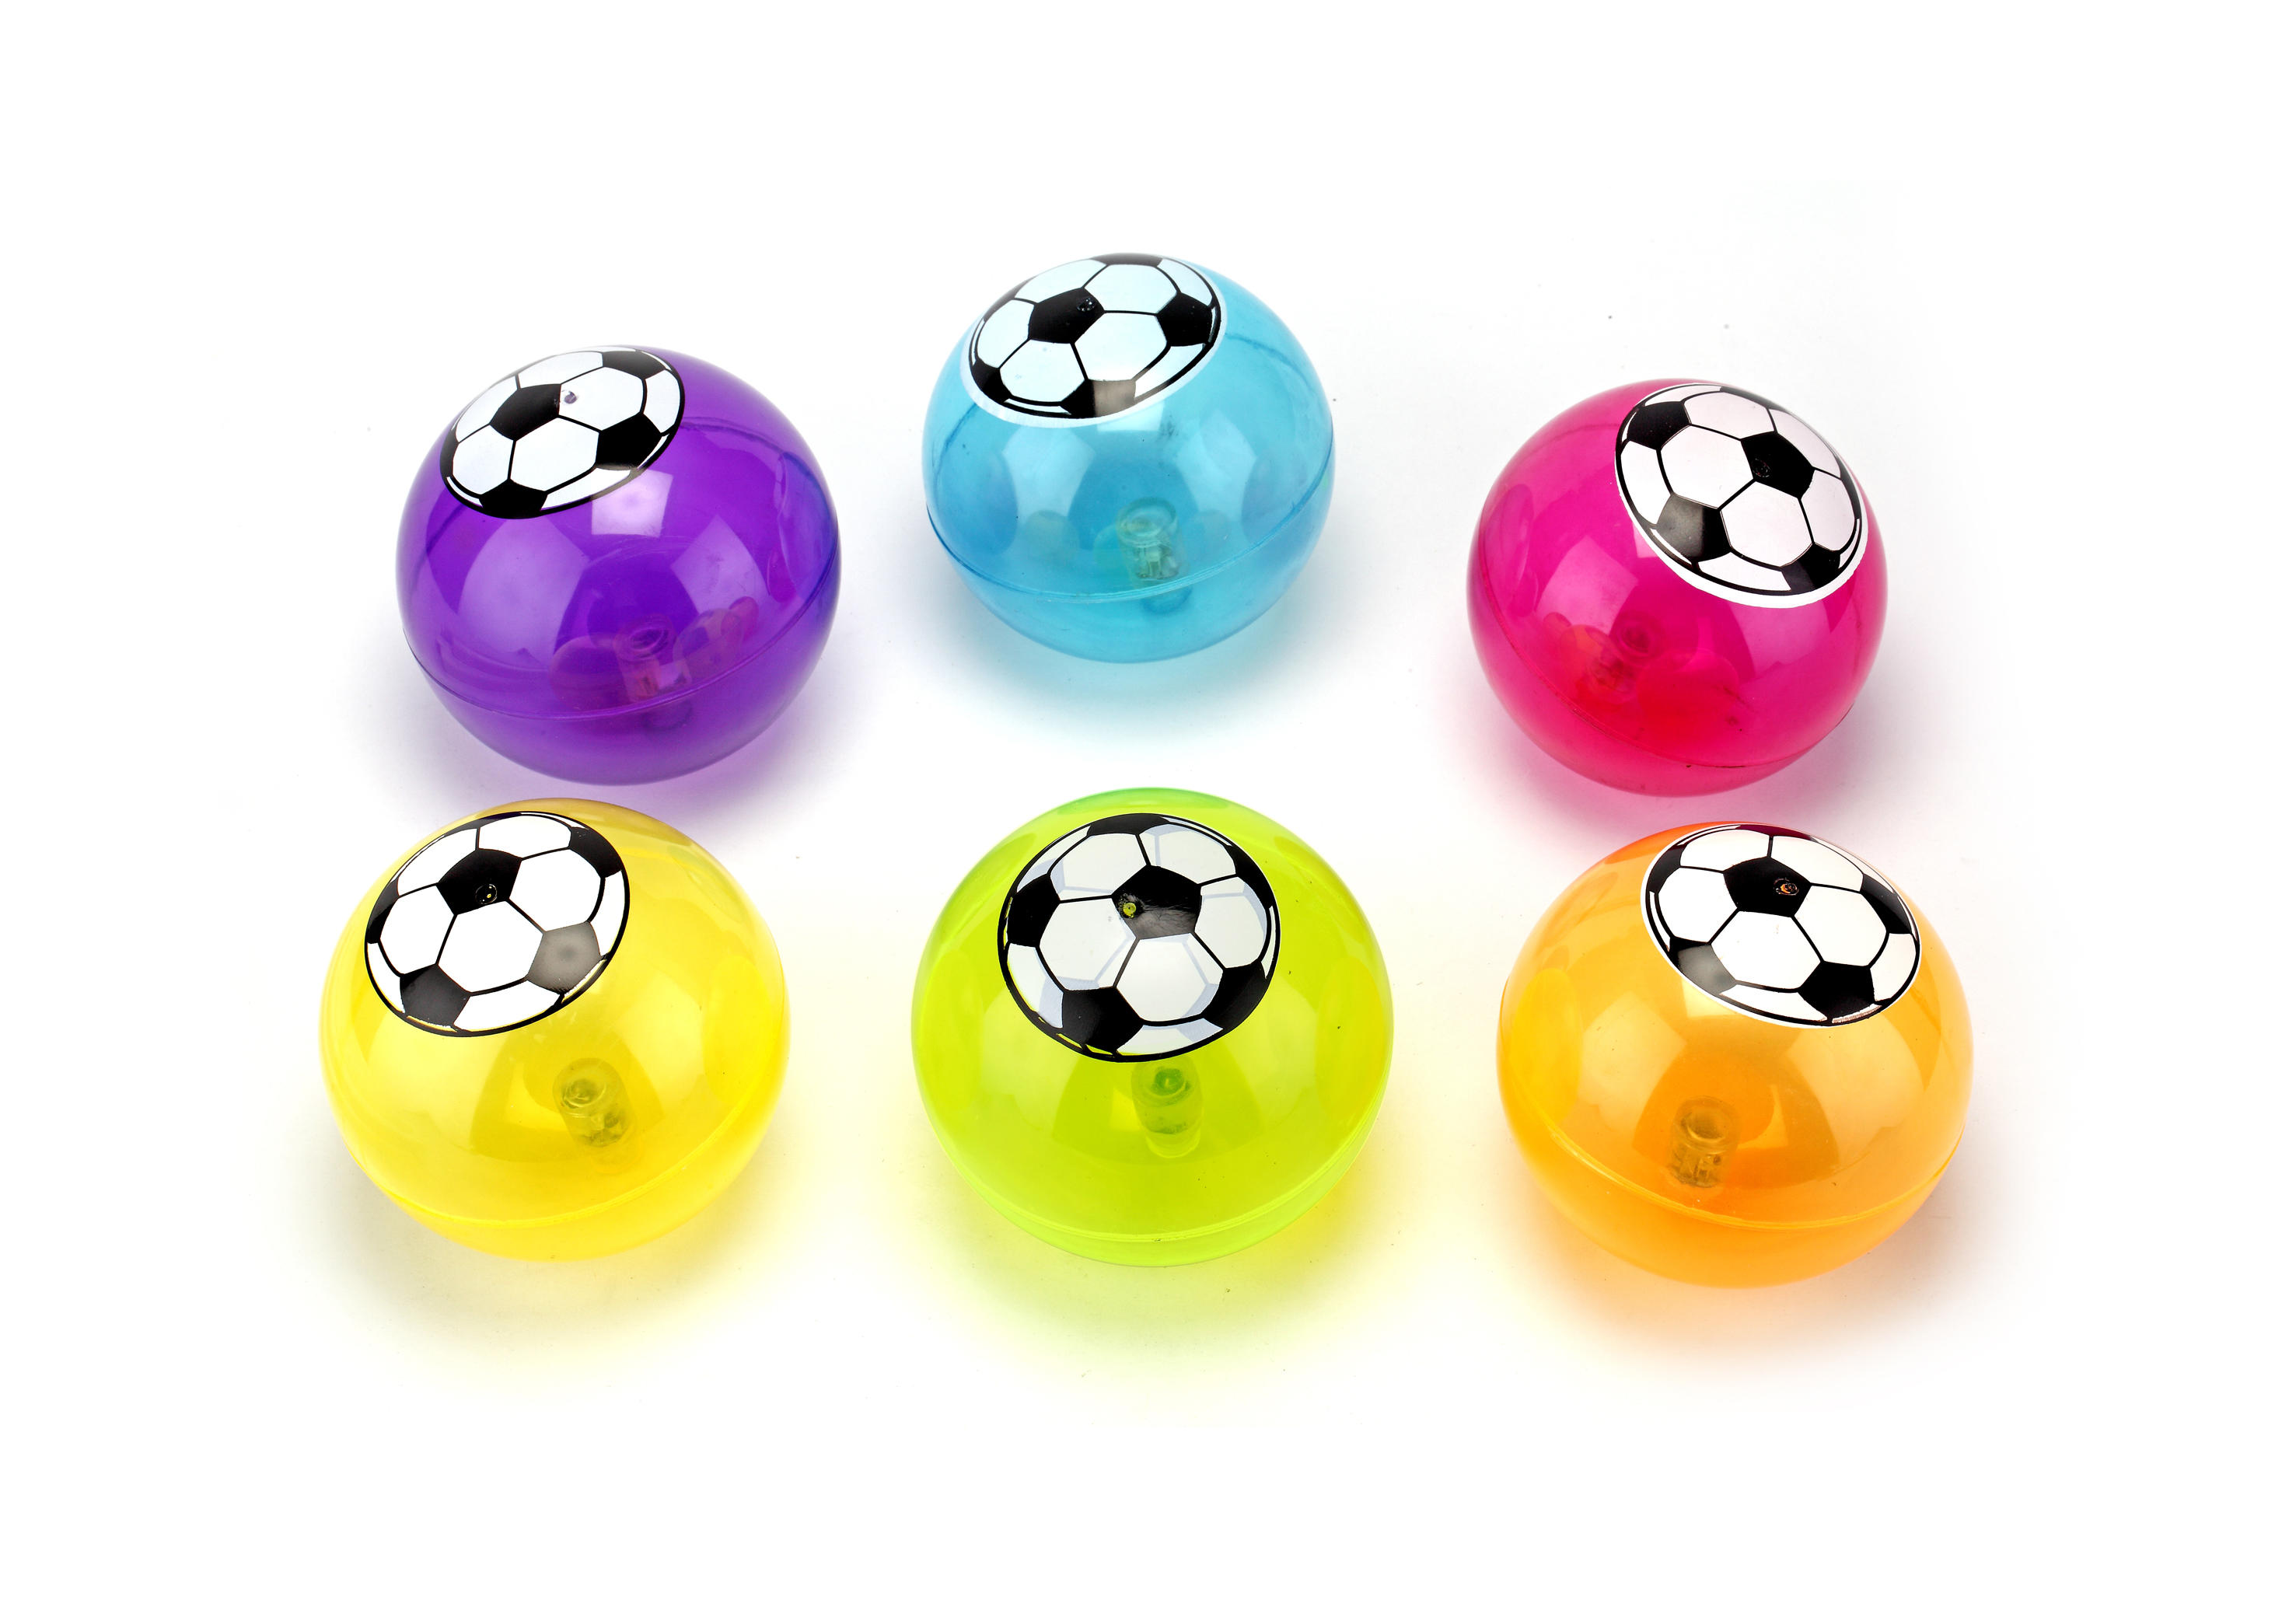 Factory new arrival 105 mm soccer painting bouncing ball set funny fidget bounce ball toy for children